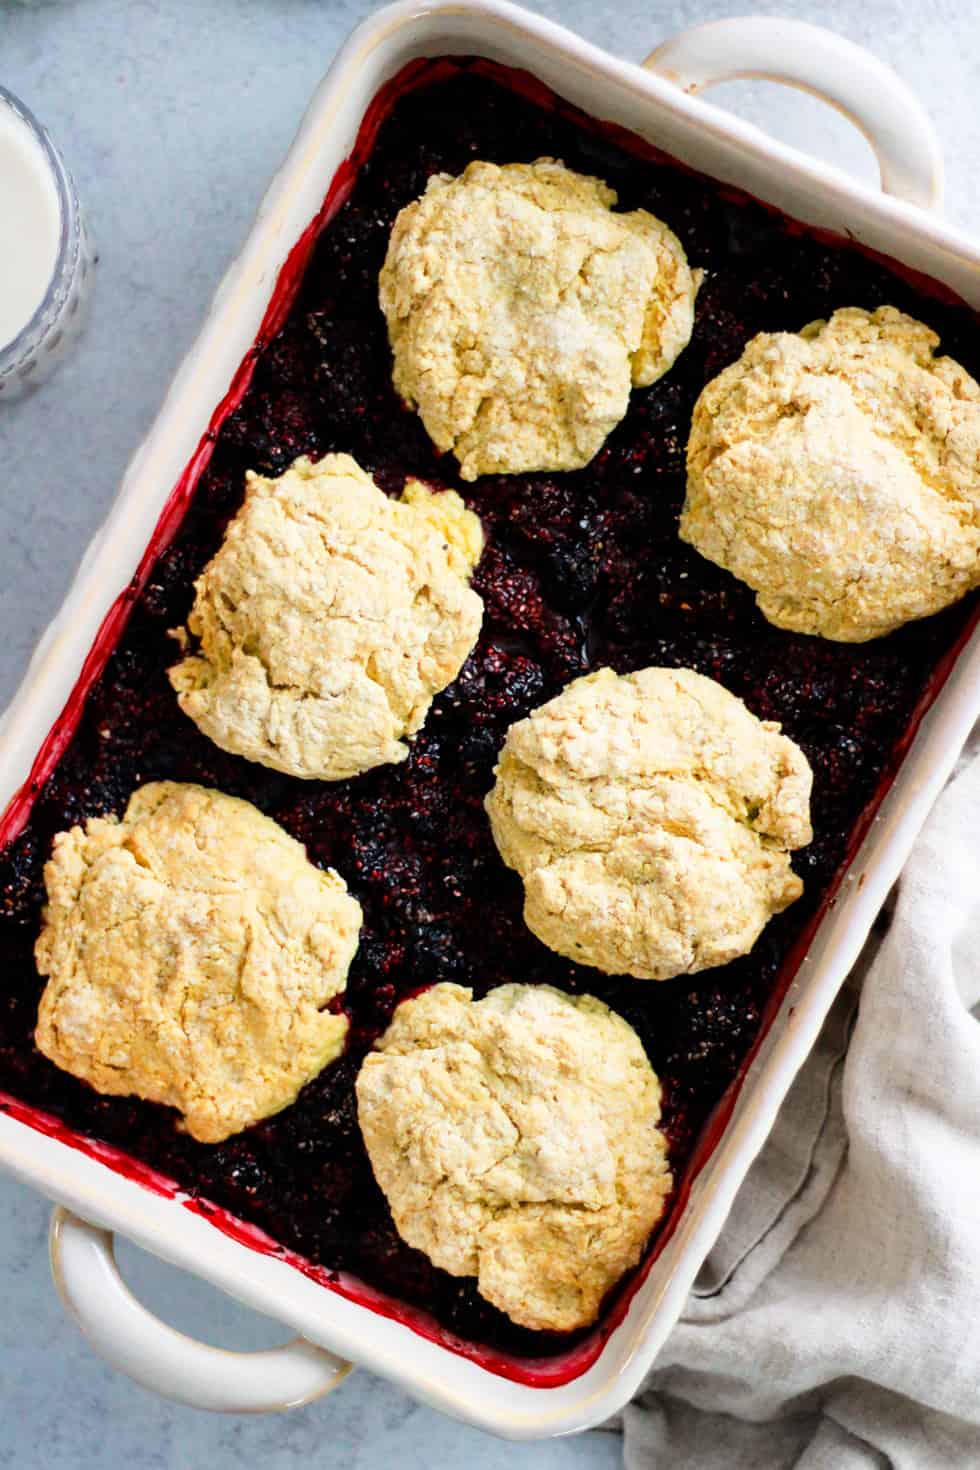 Berries covered with whole wheat biscuit topping in a white baking dish.